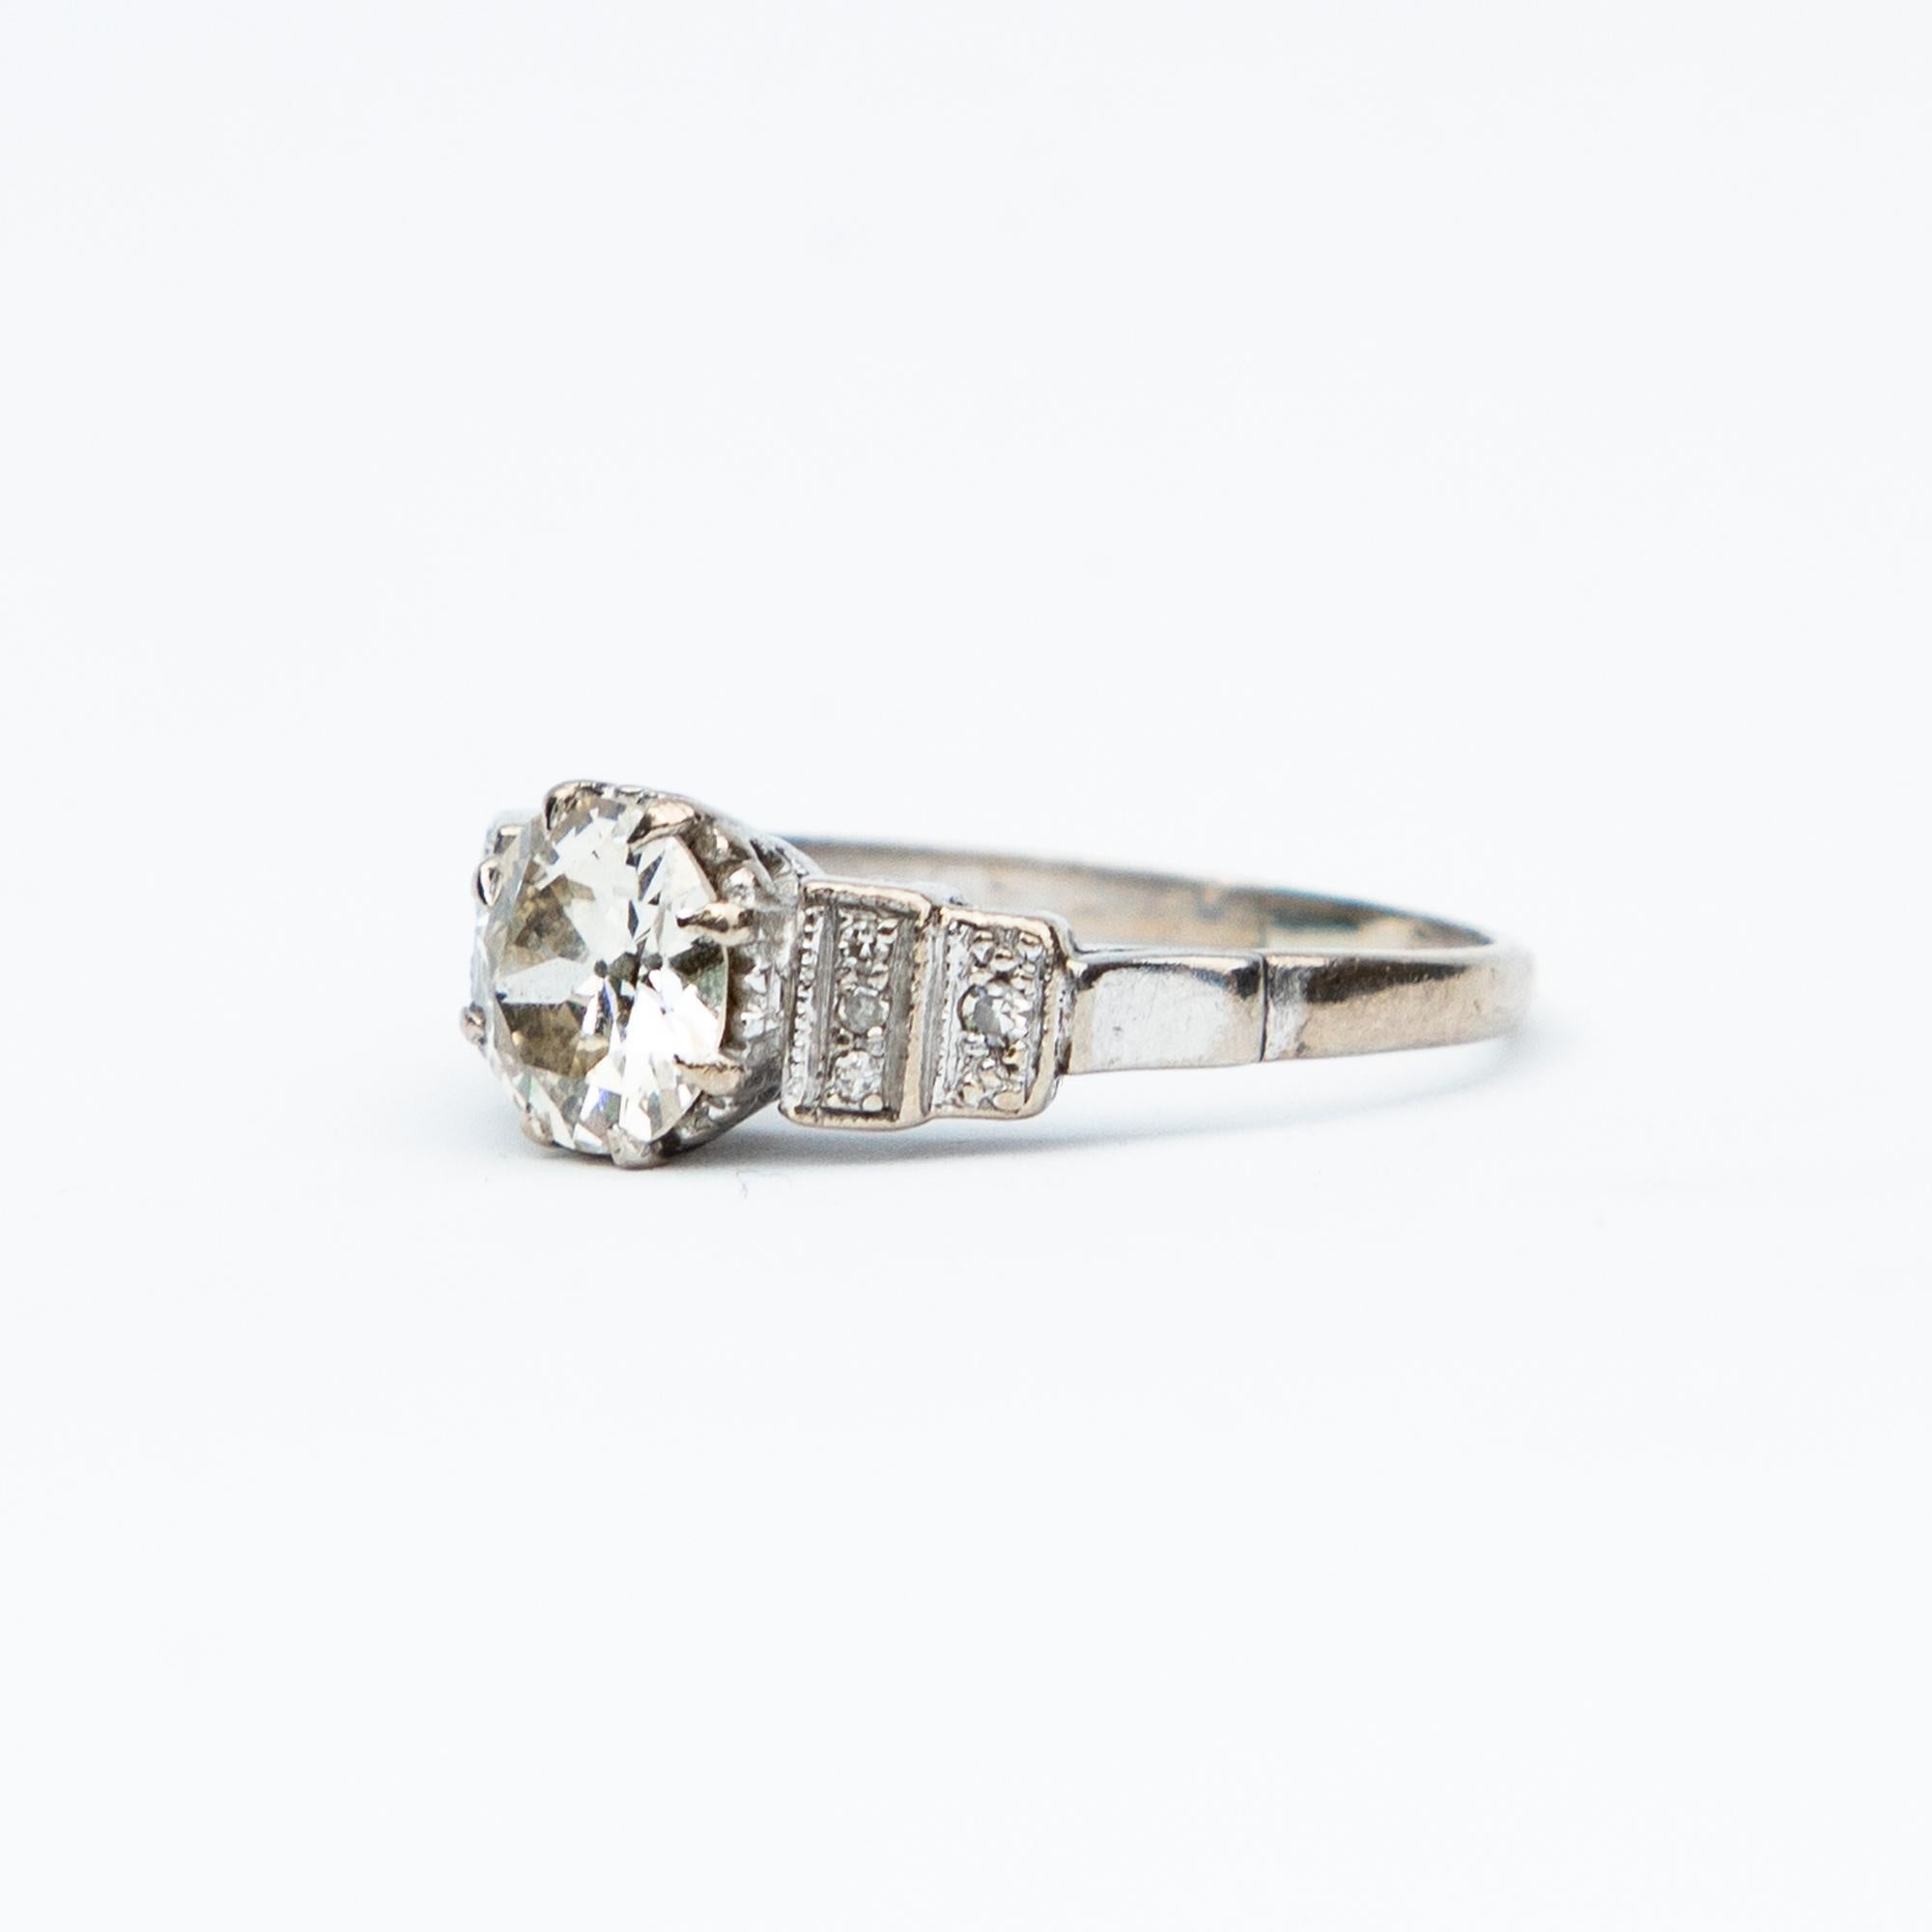 An absolutely stunning example of an Art Deco Diamond solitaire ring, beautifully set with stepped shoulders in a platinum setting. The central Old European Cut diamond is certified 1.65 carats, I colour and VS2 clarity.

Ring Size M or